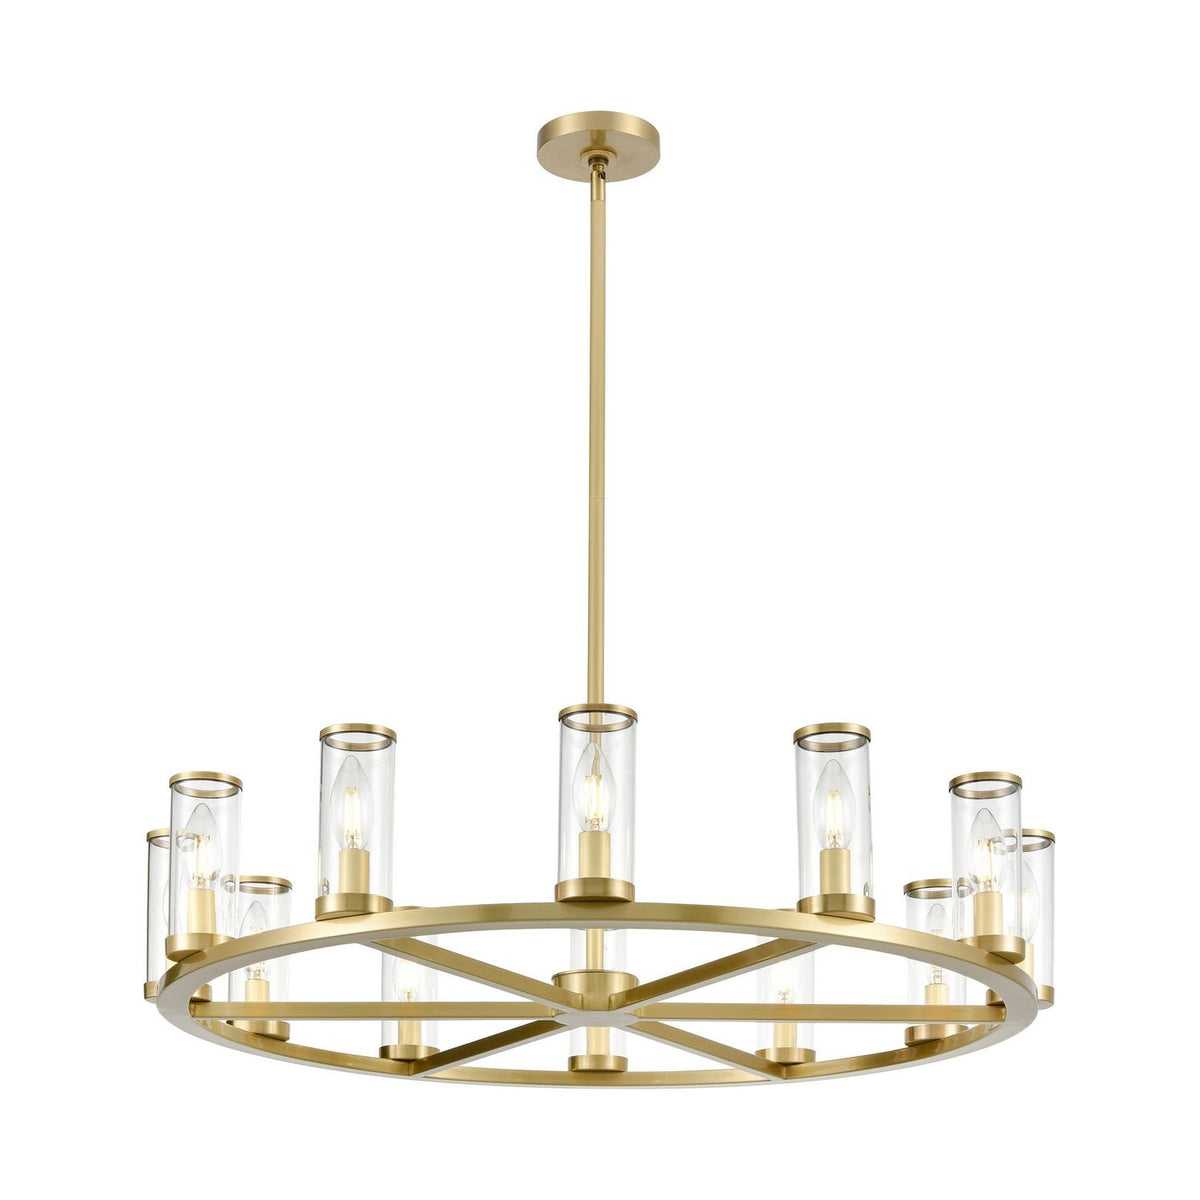 Alora Lighting - CH309012NBCG - 12 Light Chandelier - Revolve - Clear Glass/Natural Brass|Clear Glass/Polished Nickel|Clear Glass/Urban Bronze